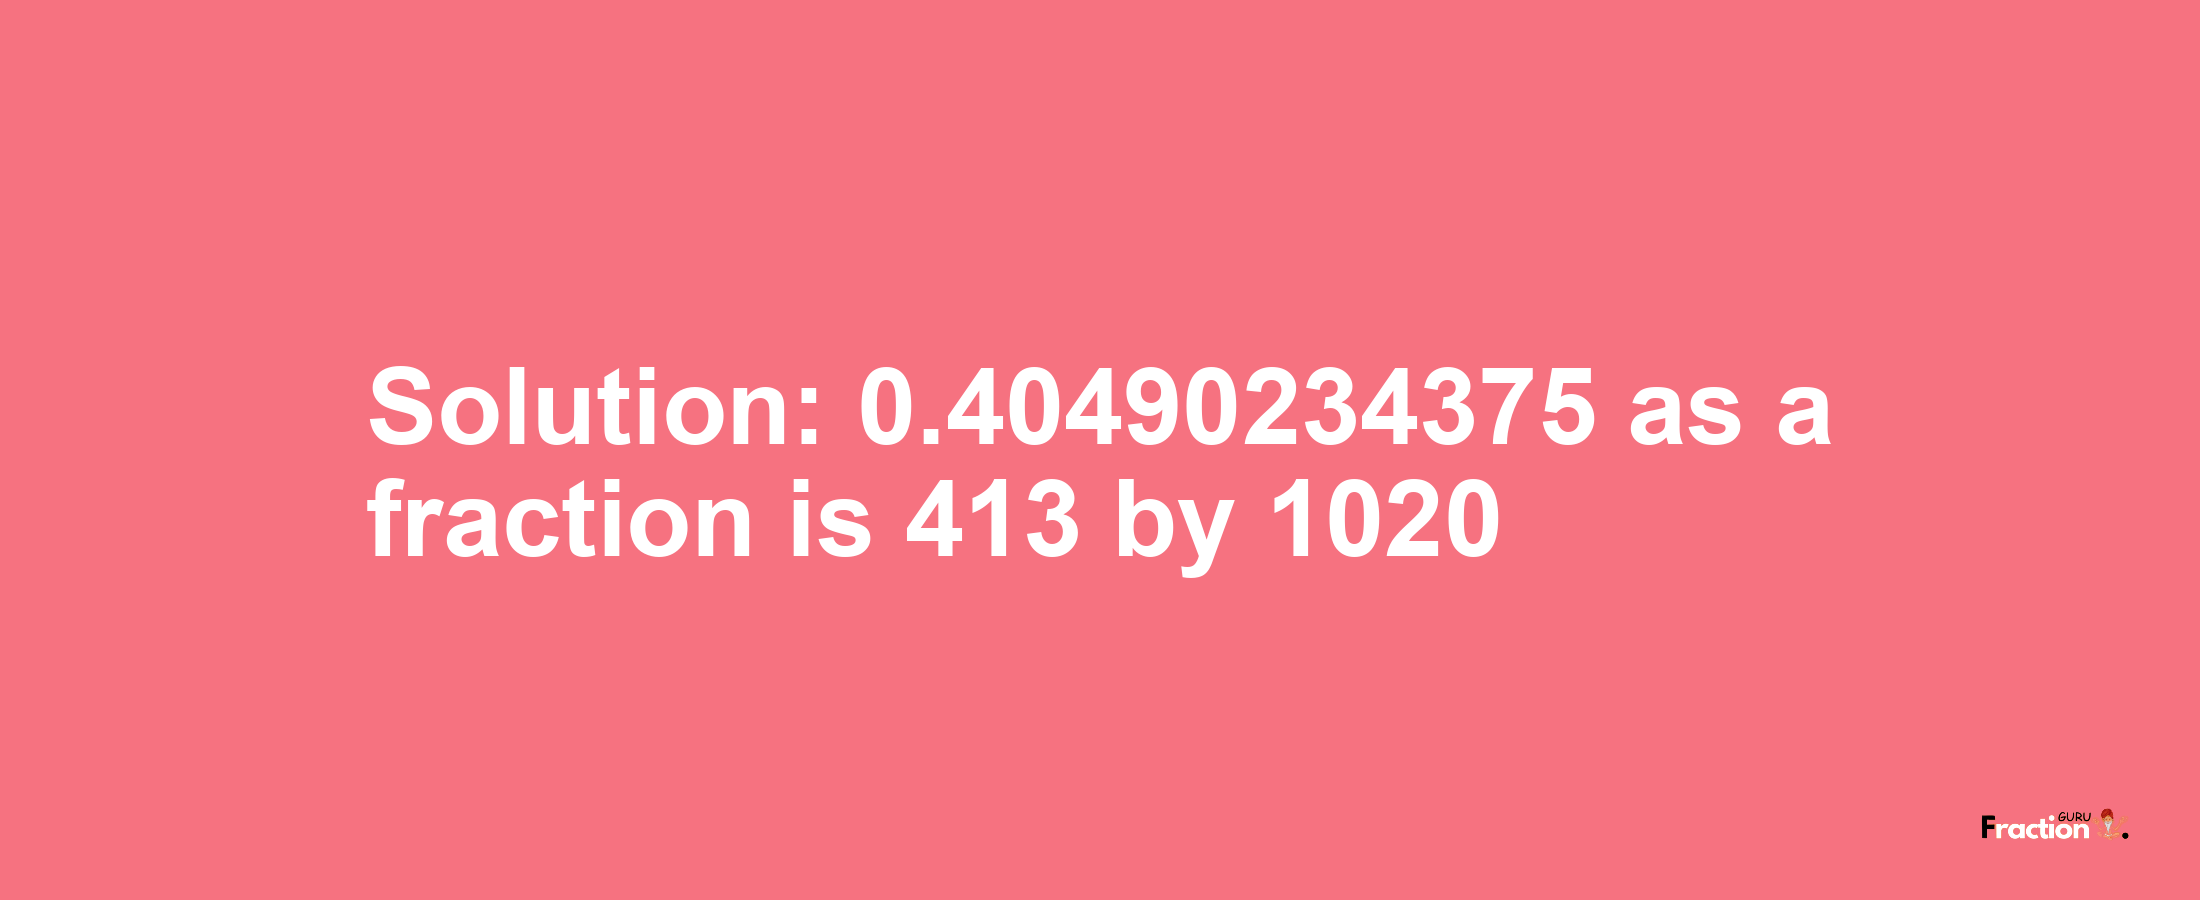 Solution:0.40490234375 as a fraction is 413/1020